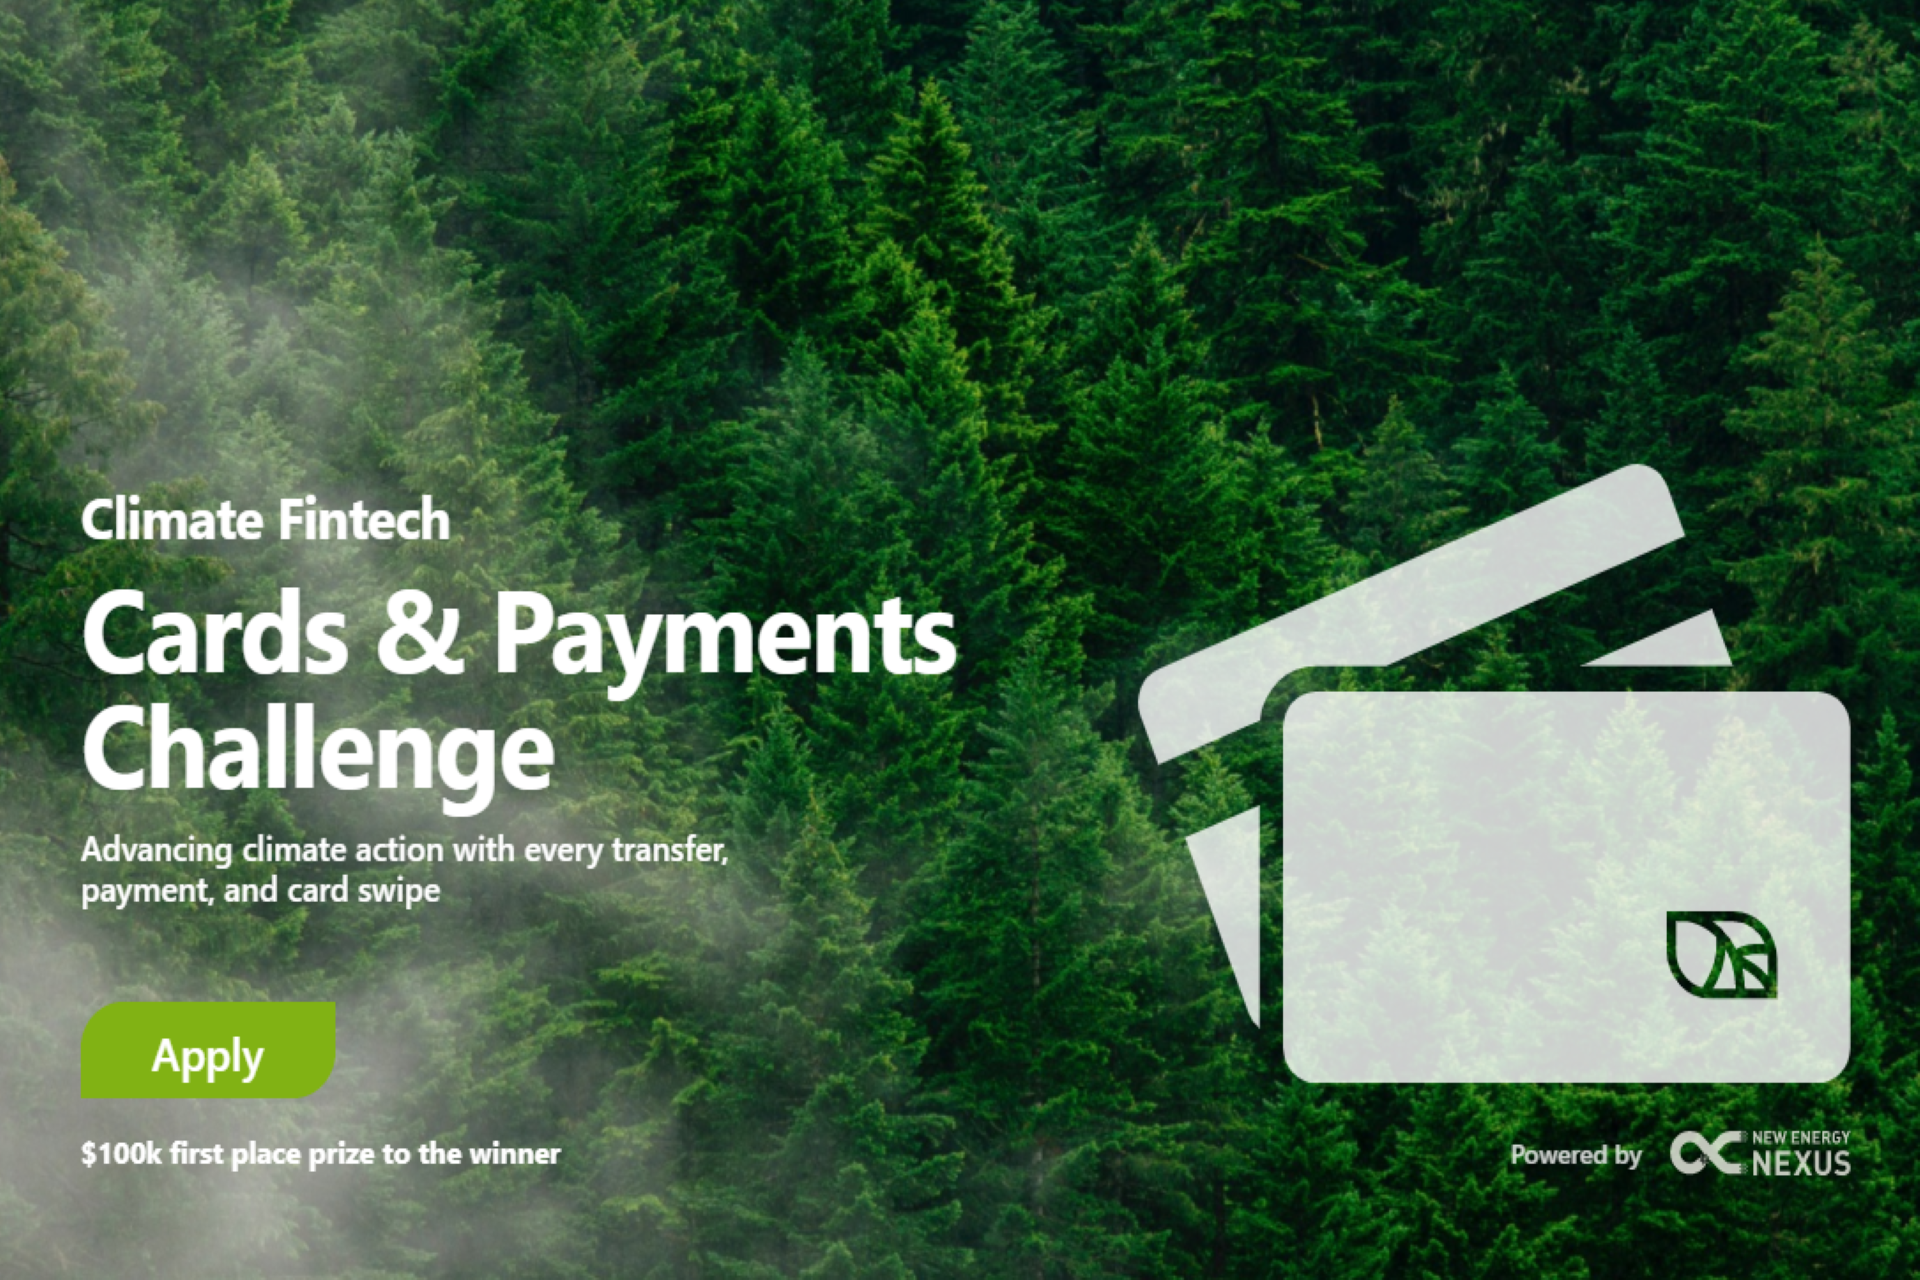 new energy nexus barclays mastercard launch fintech Cards & Payments Challenge (C&P Challenge)